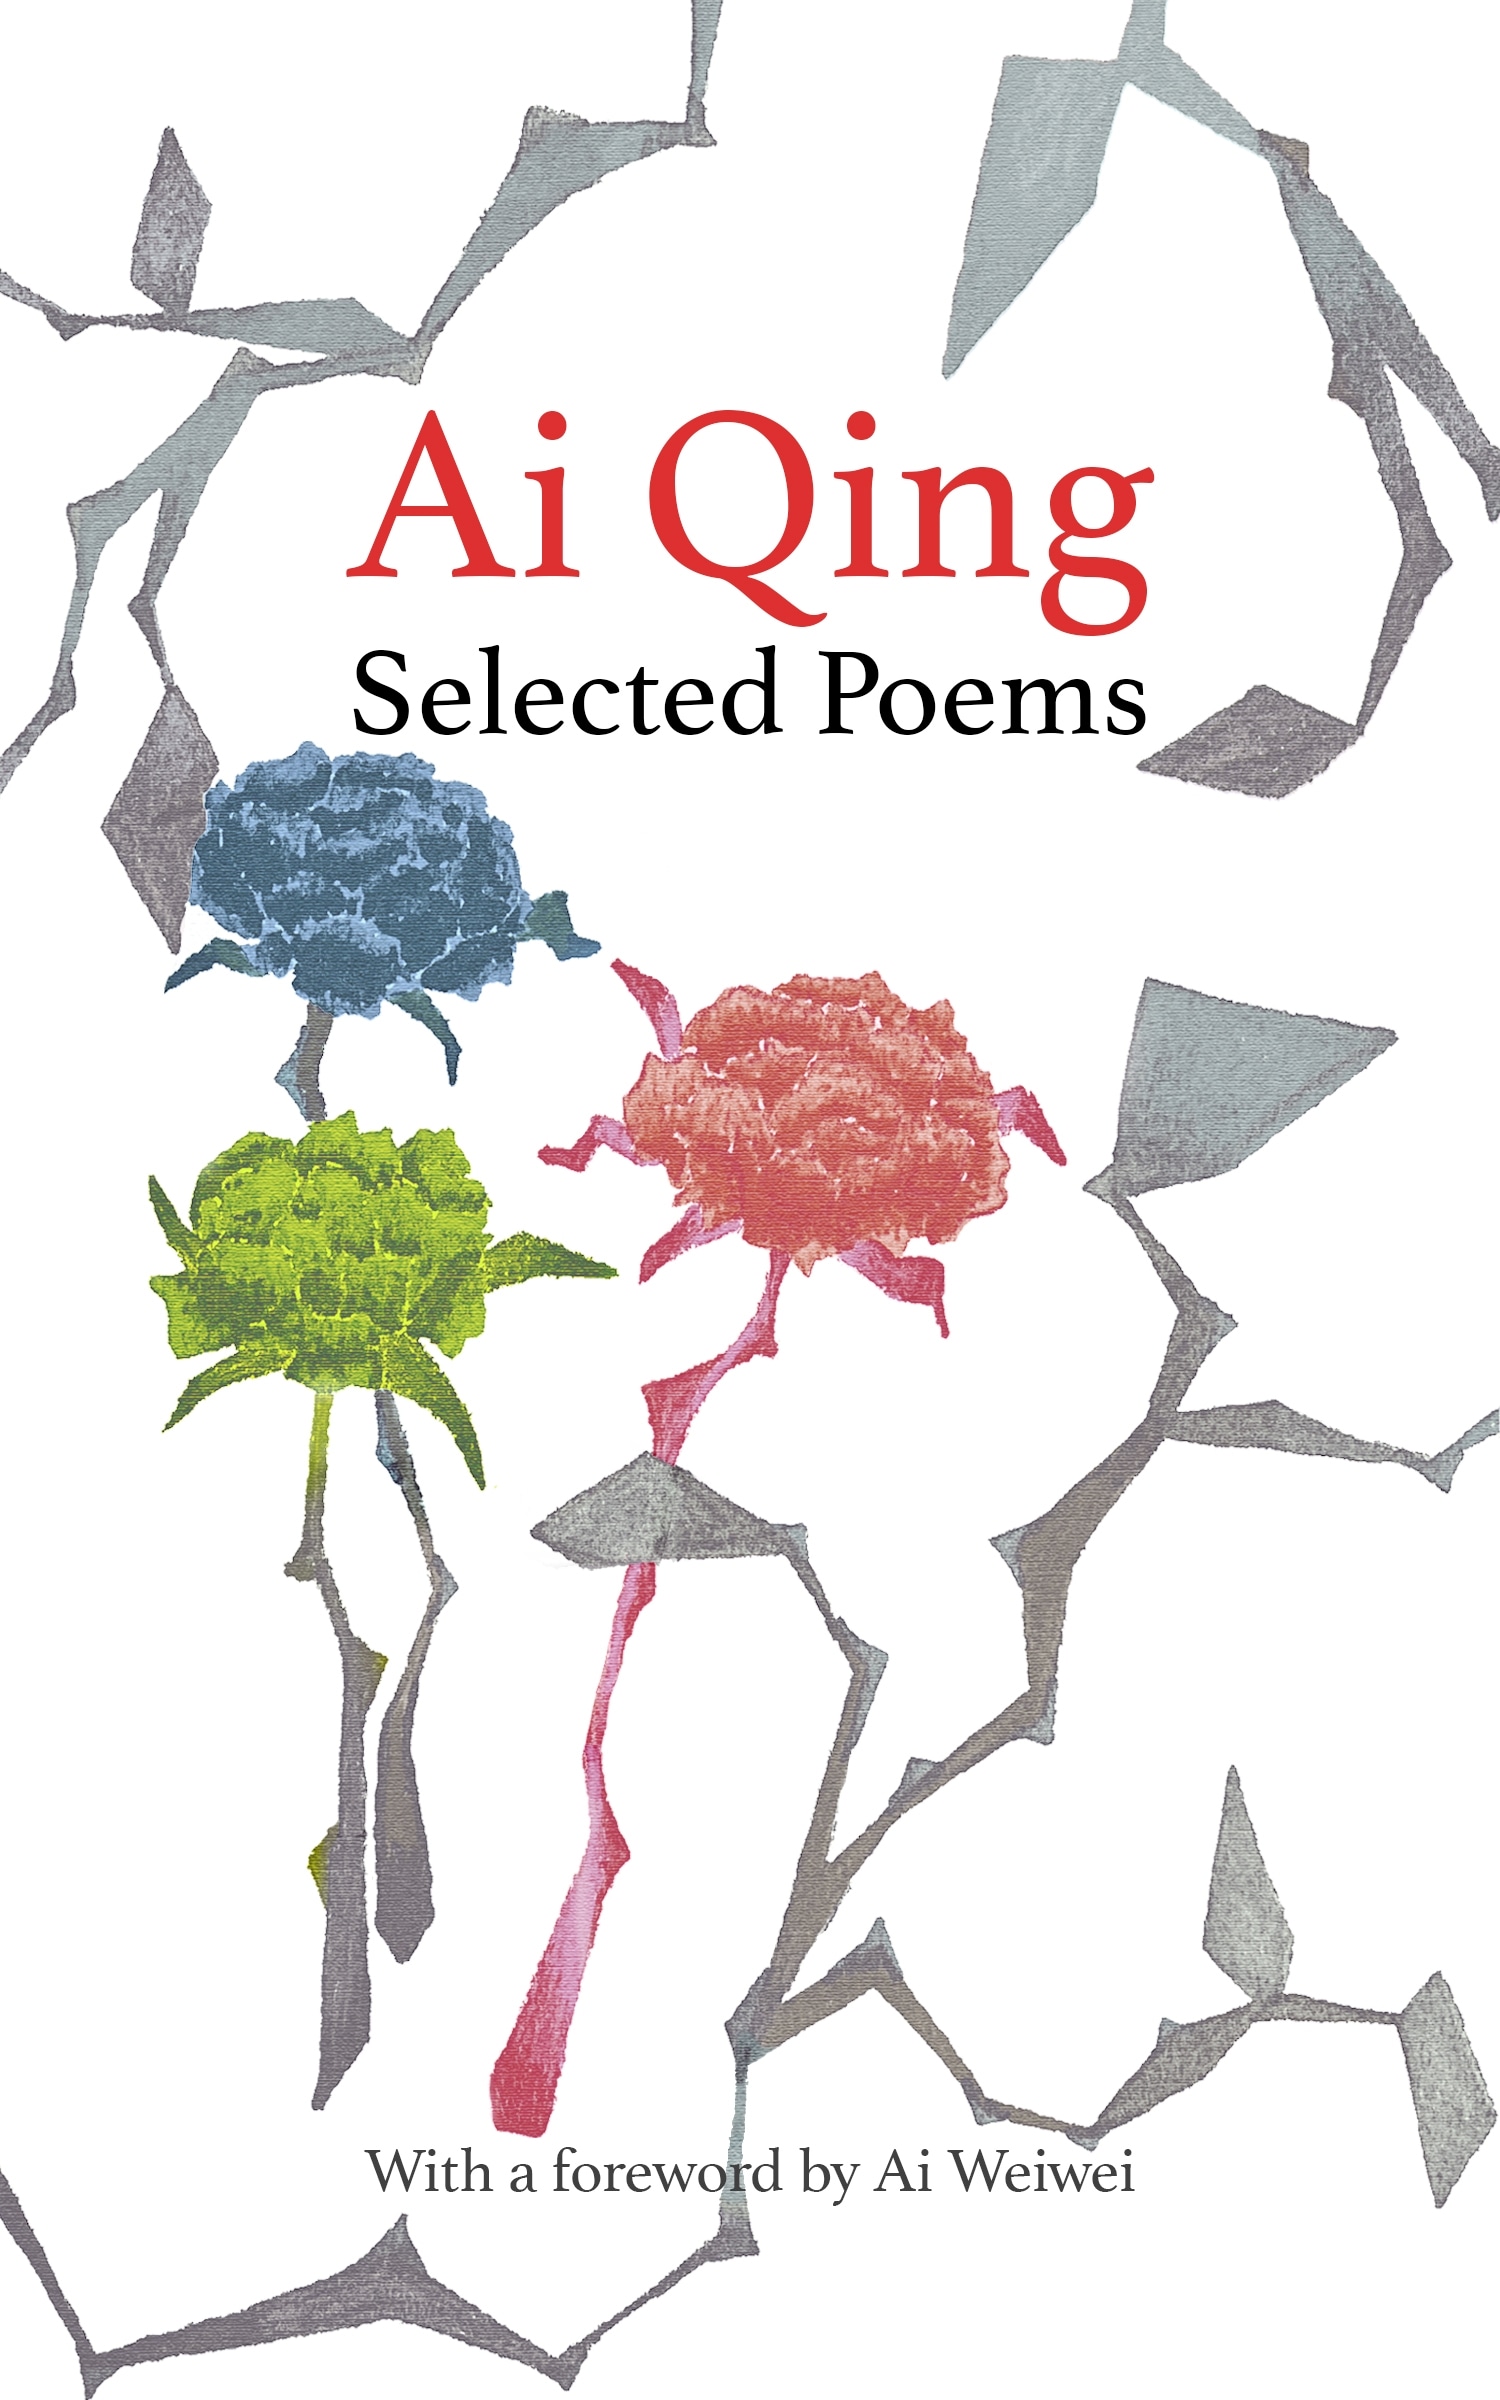 Book “Selected Poems” by Ai Qing, Ai Weiwei — November 2, 2021